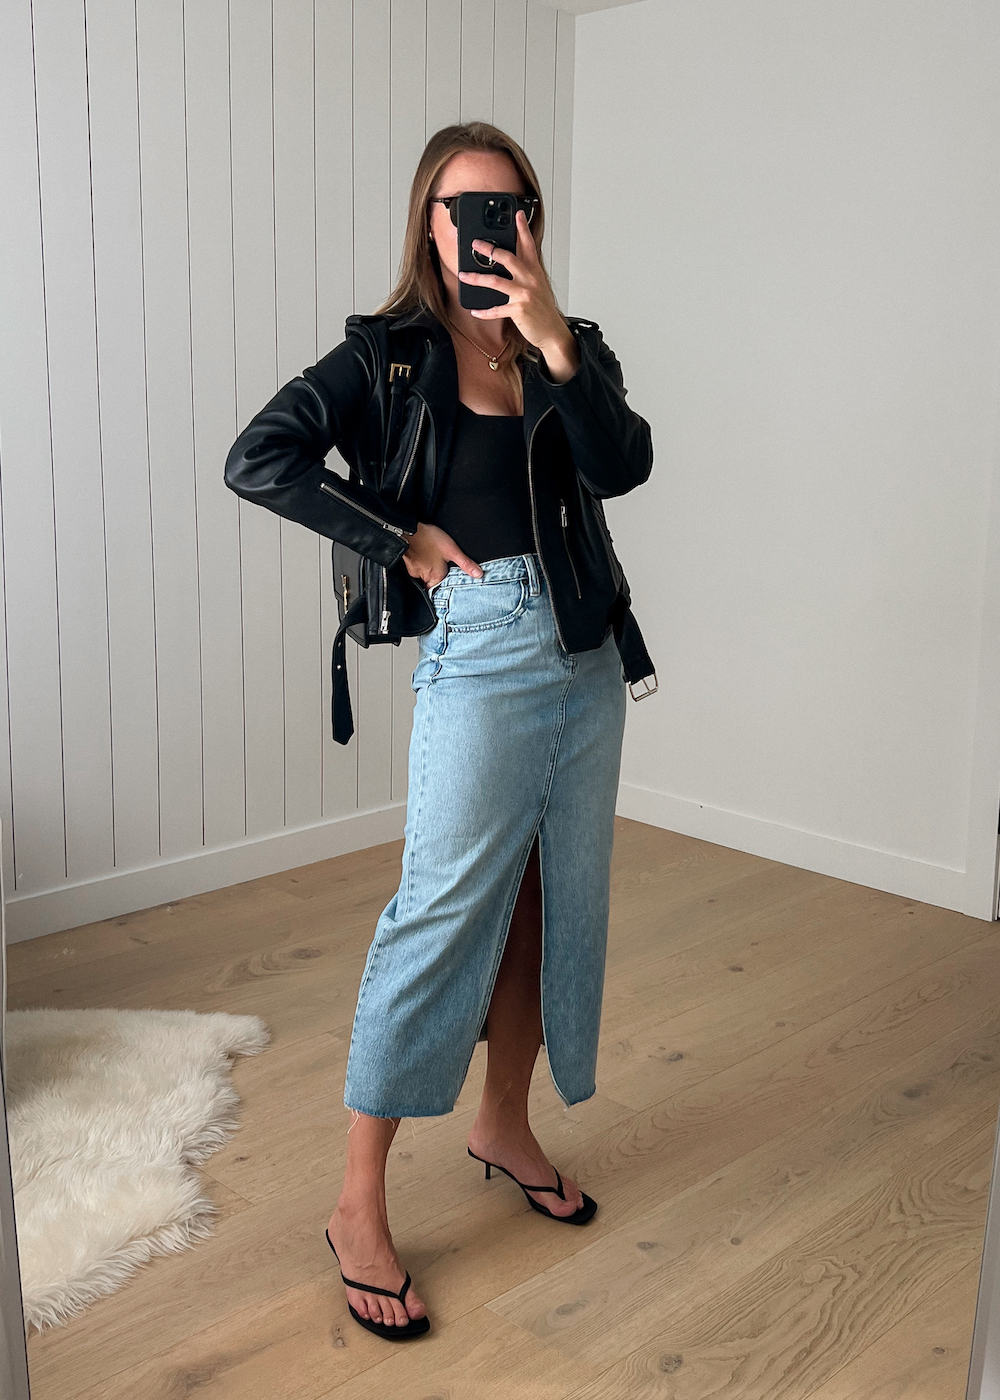 Christal wearing a denim midi skirt with a black tank top and a leather jacket.